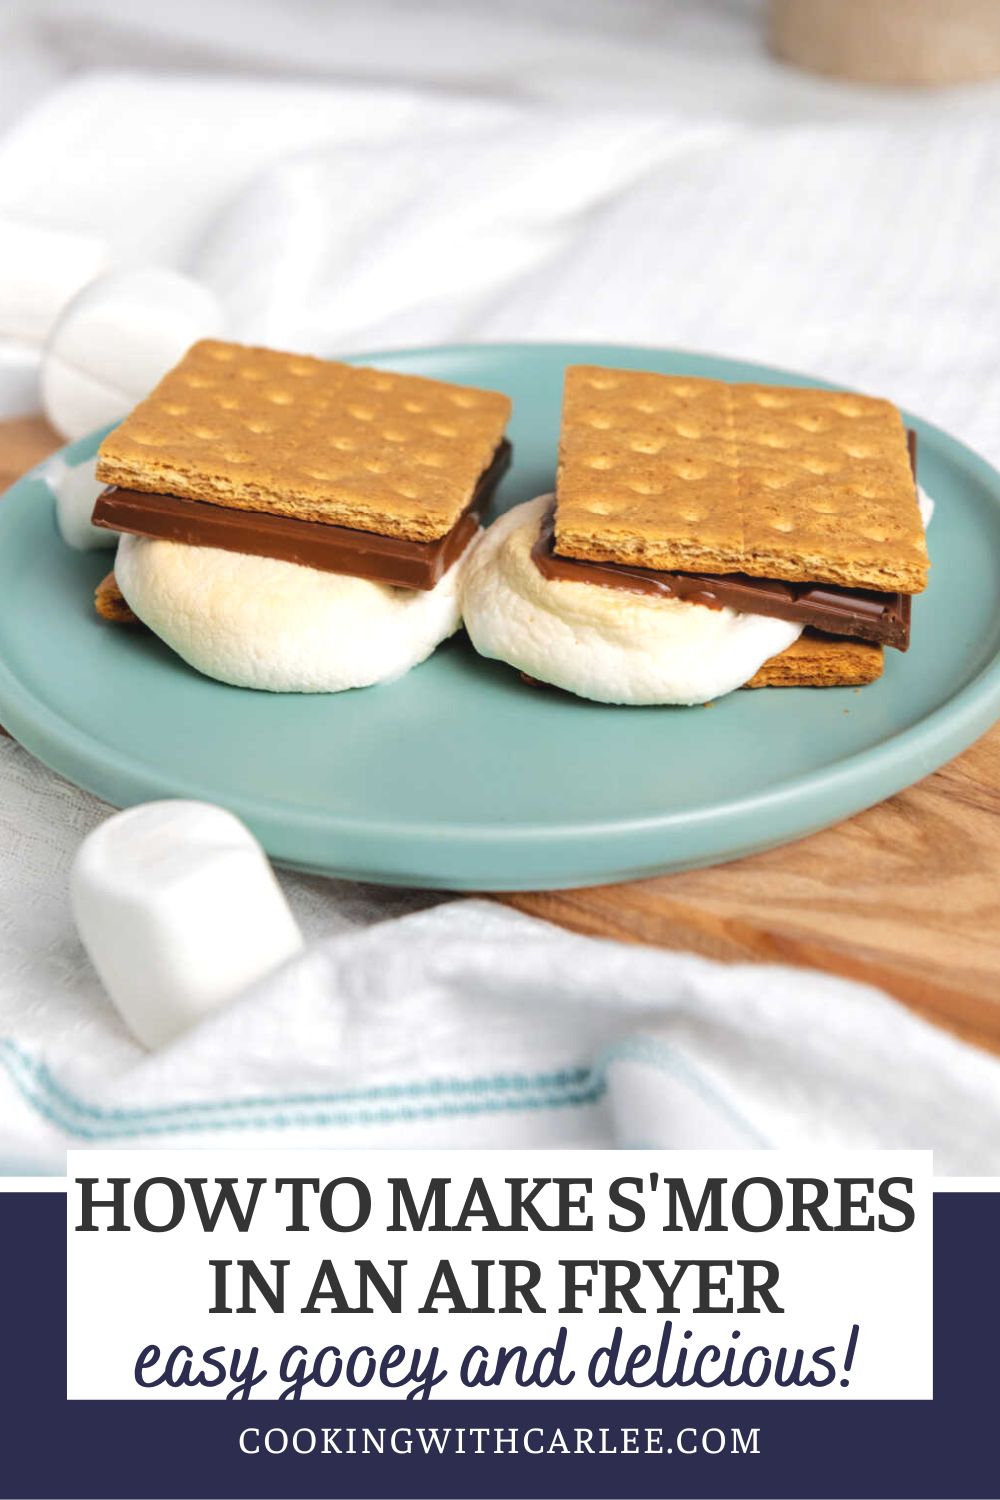 If you are craving toasty gooey s'mores, but don't want to build a campfire, you are in the right place. I'll show you how to make s'mores in an air fryer for a quick and easy treat.